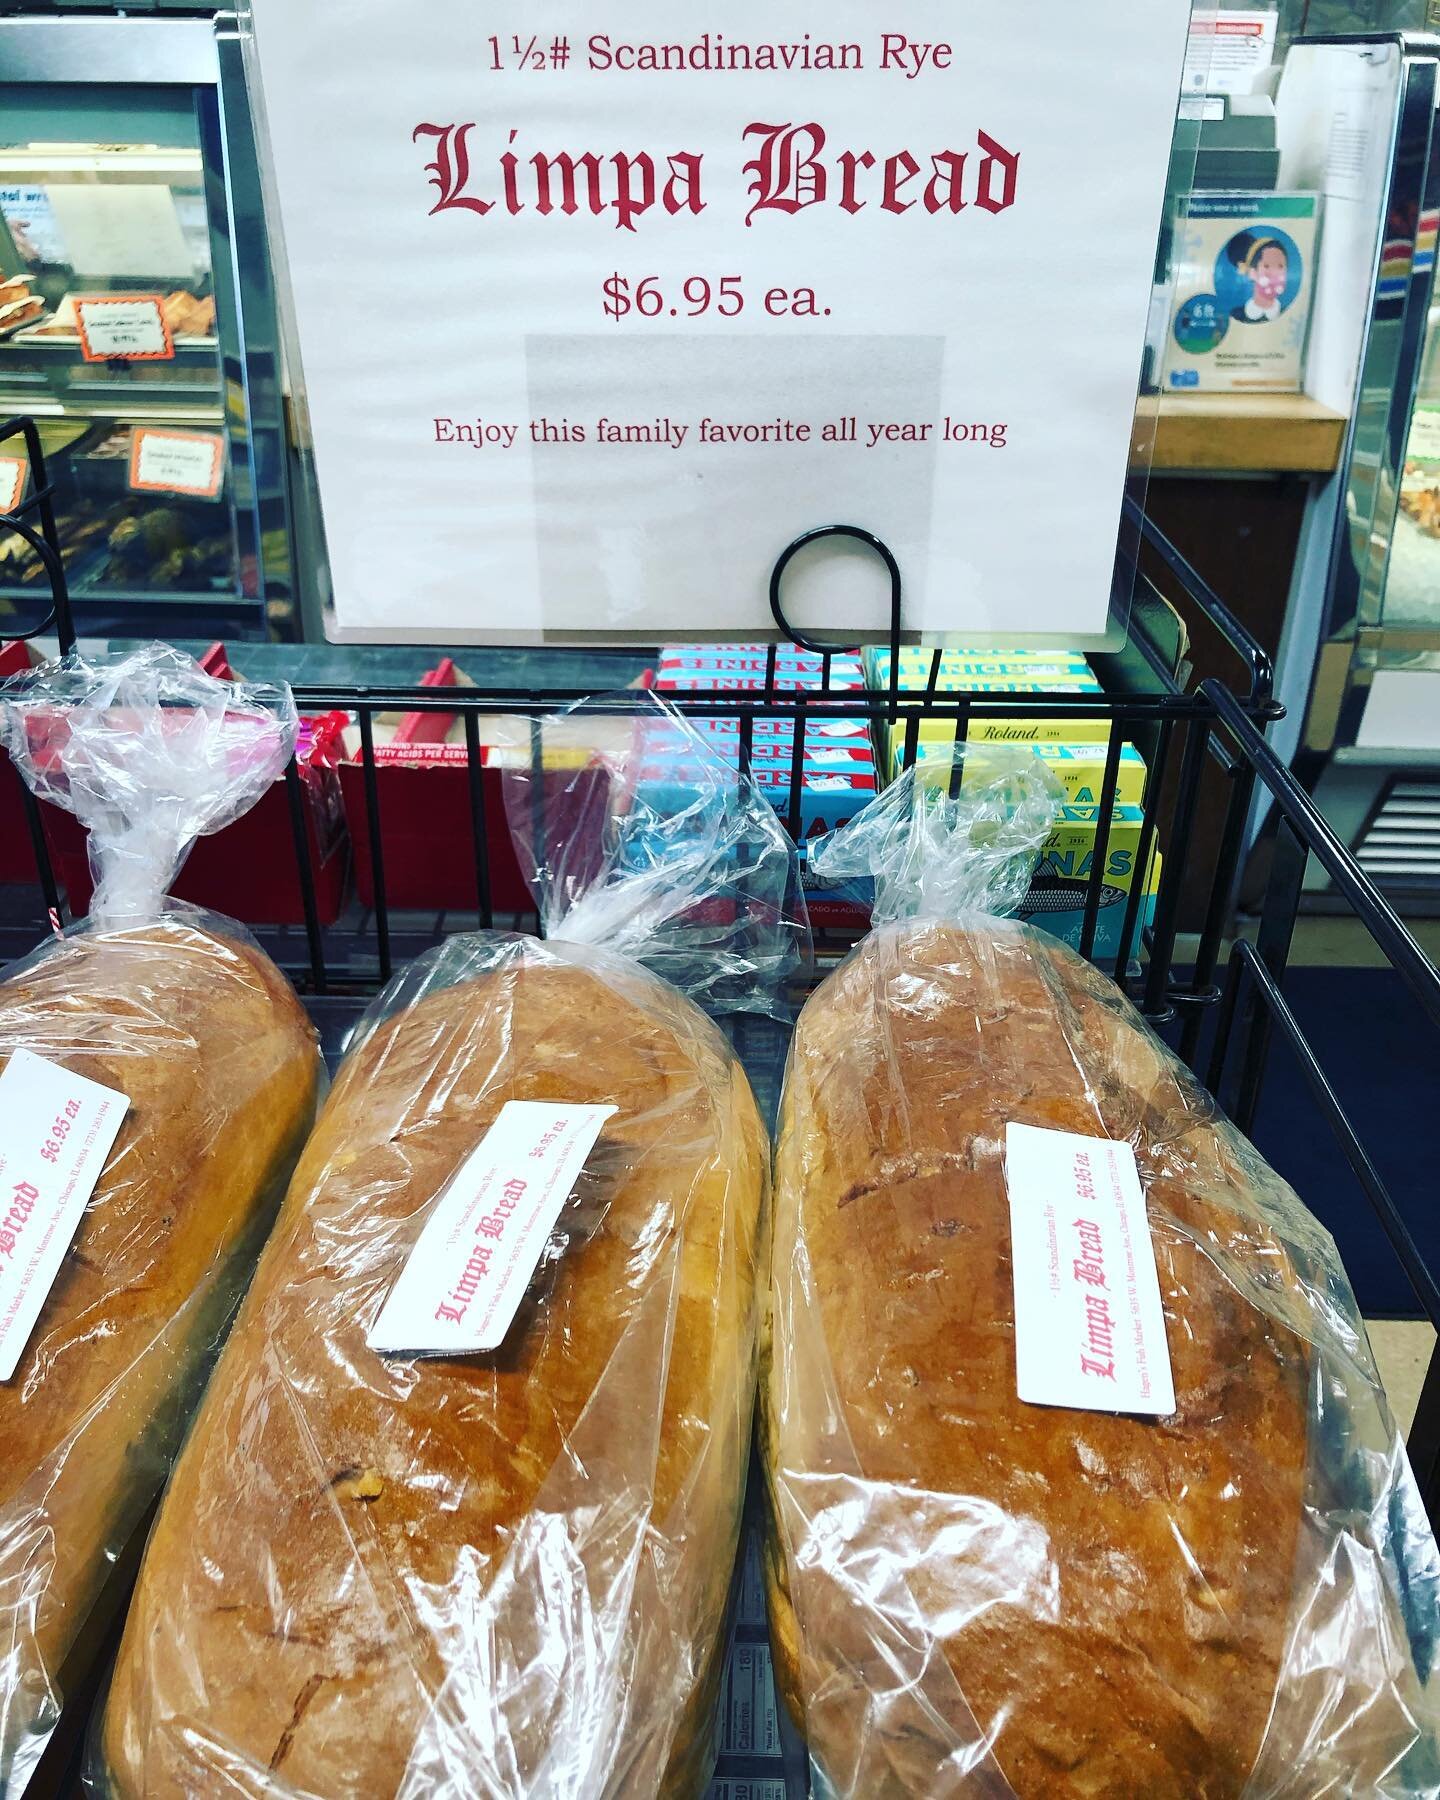 Limpa bread is in the house! 🙌🙌 #scandinavianholiday #limpa #hagensfishmarket